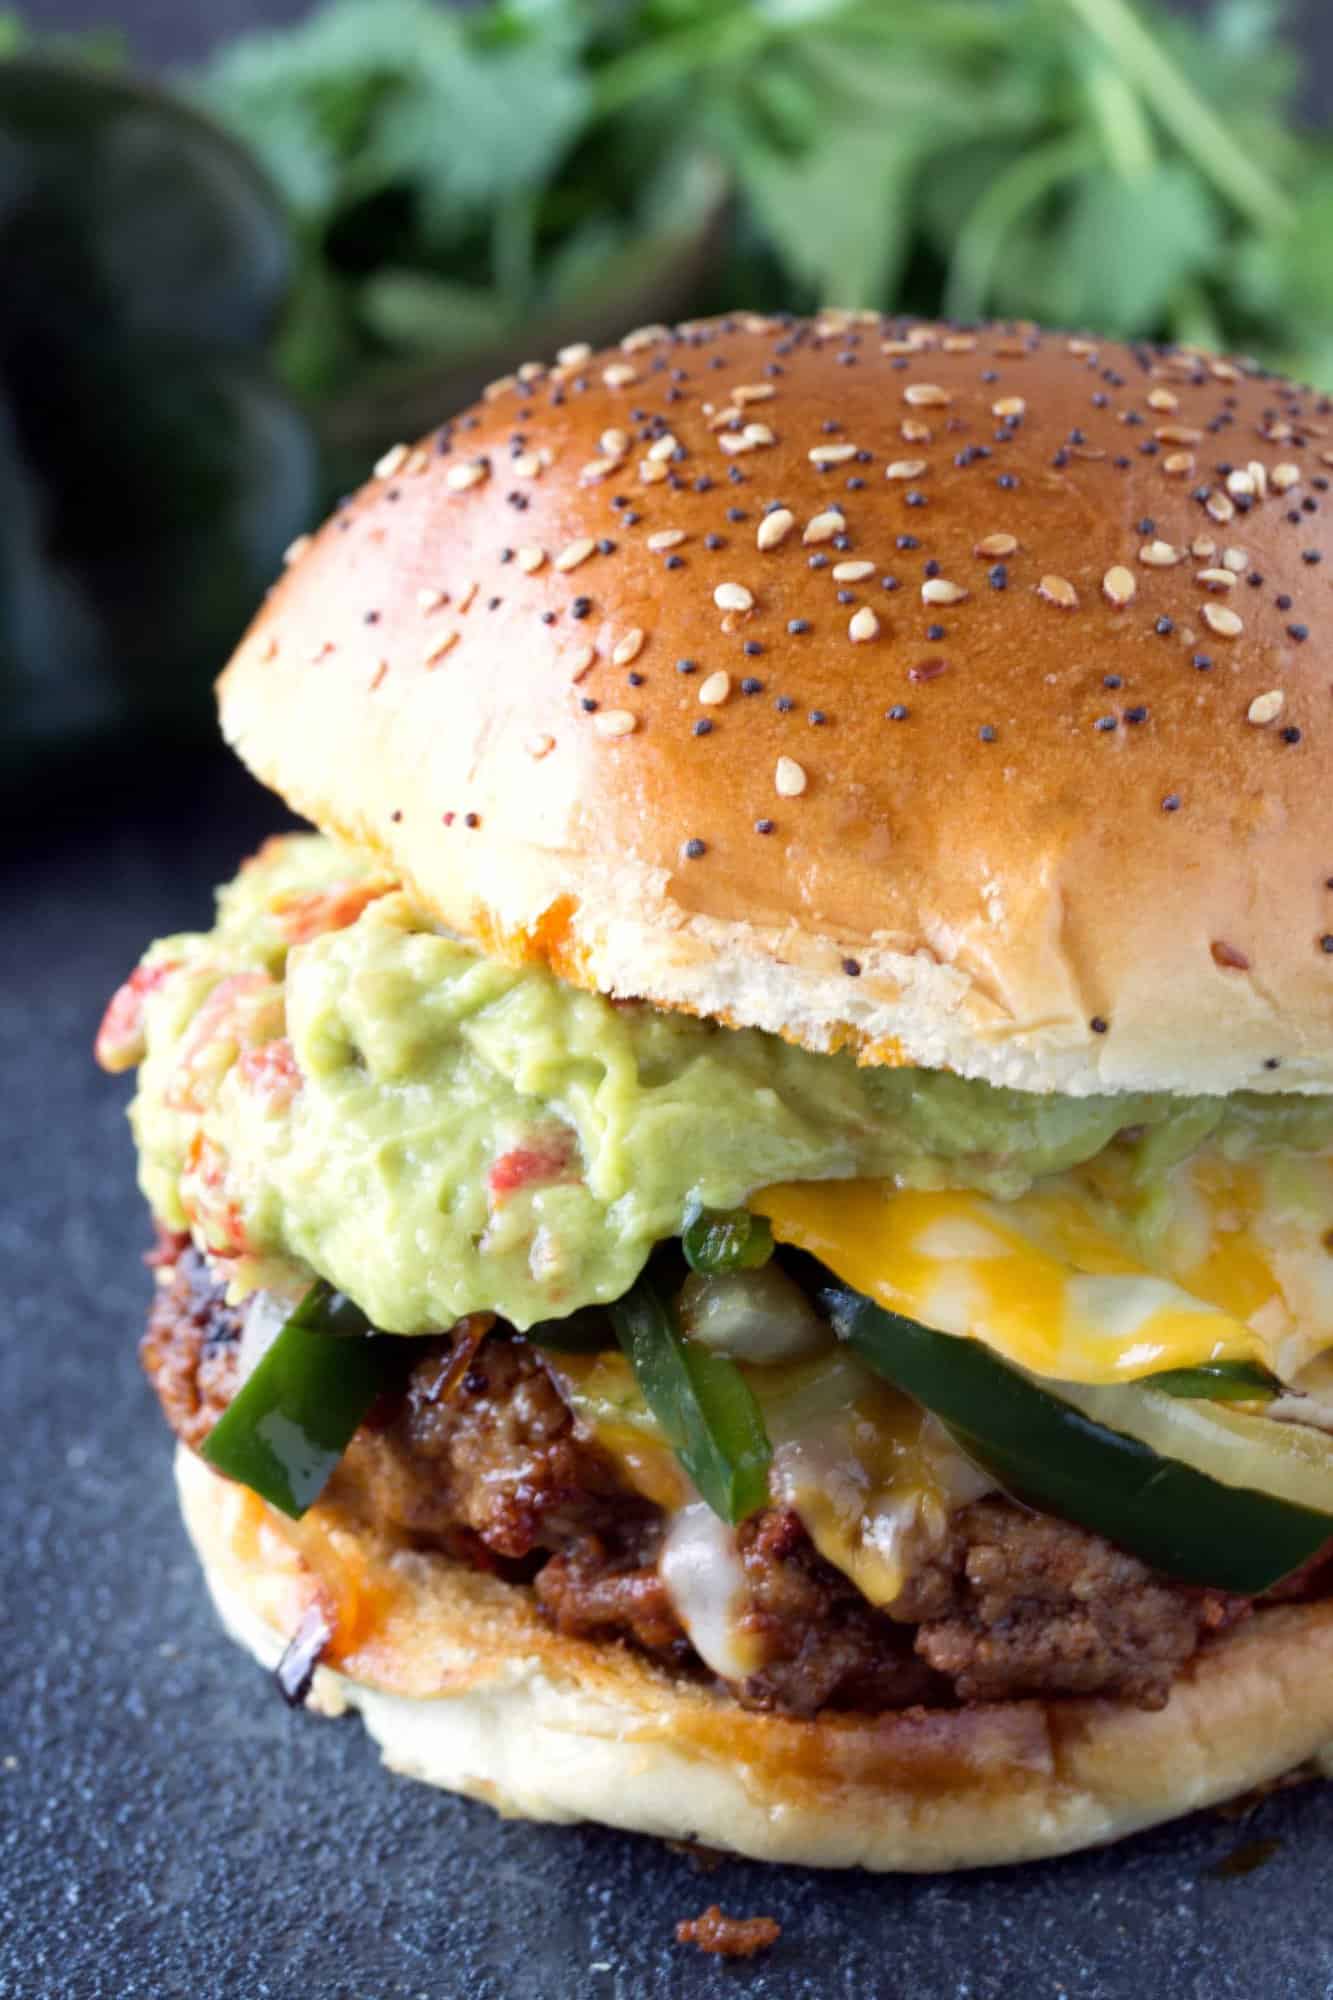 This Mexican-inspired burger packs a punch of flavor with the chorizo ground beef patty smothered in peppers, onions, and cheese. It's a Queso Fundido Chorizo Hamburger.